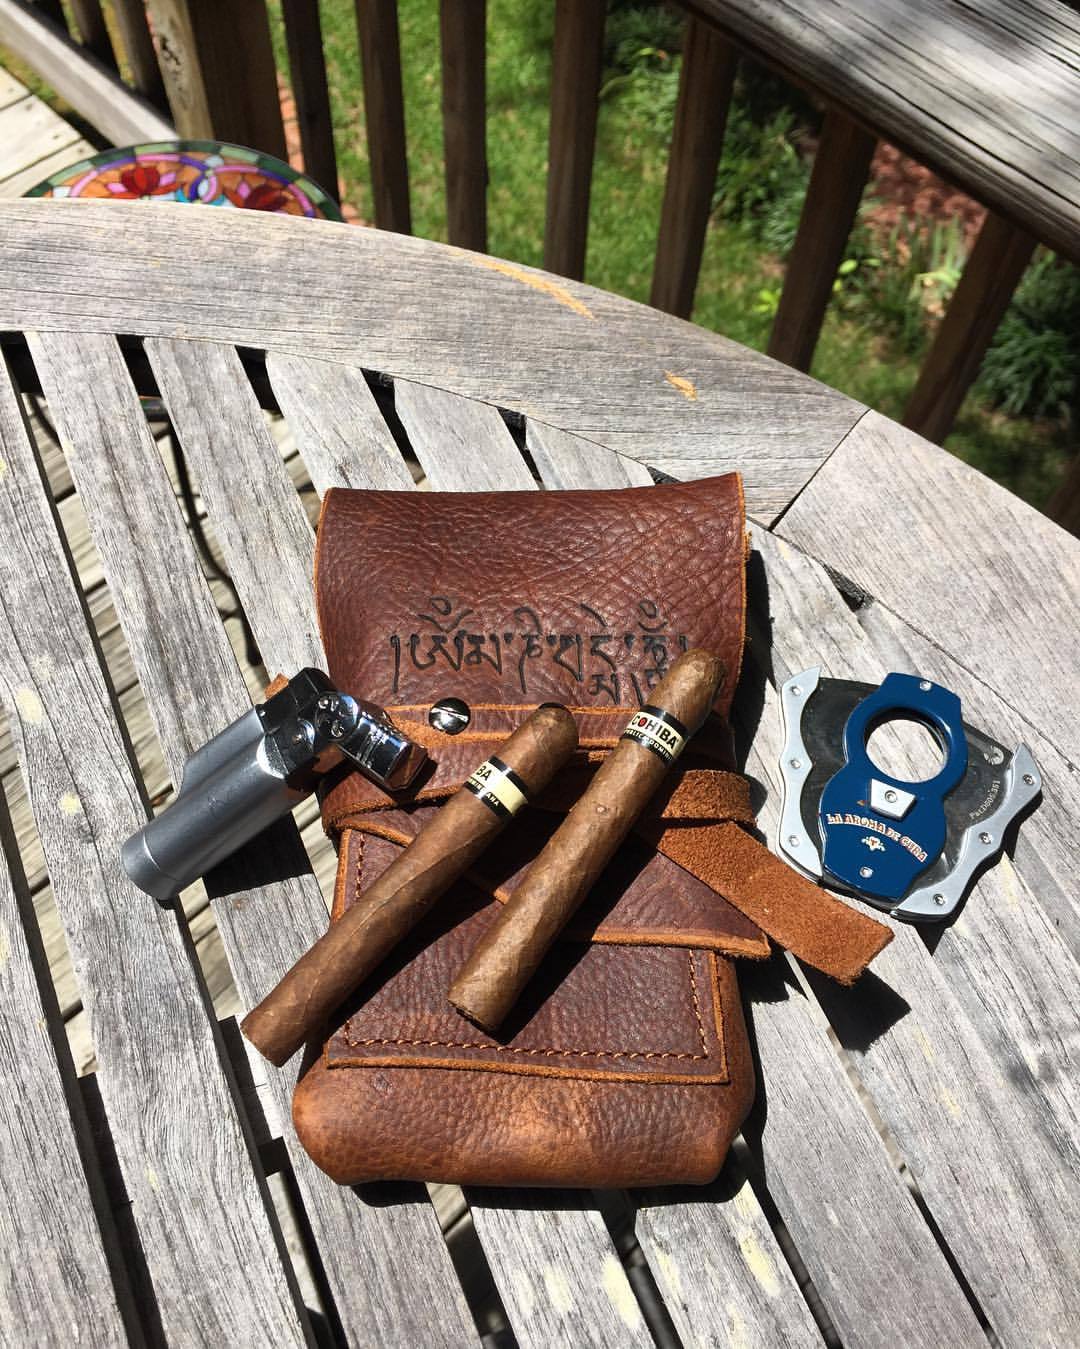 legendarysaxon:
“This customer had me burn Tibetan script into his Legendary Saxon leather cigar carrier. Pretty cool. I hadn’t done that script before. I can hand burn any language into your leather cut. #madeinusa #veteranmade #ruggedluxury...